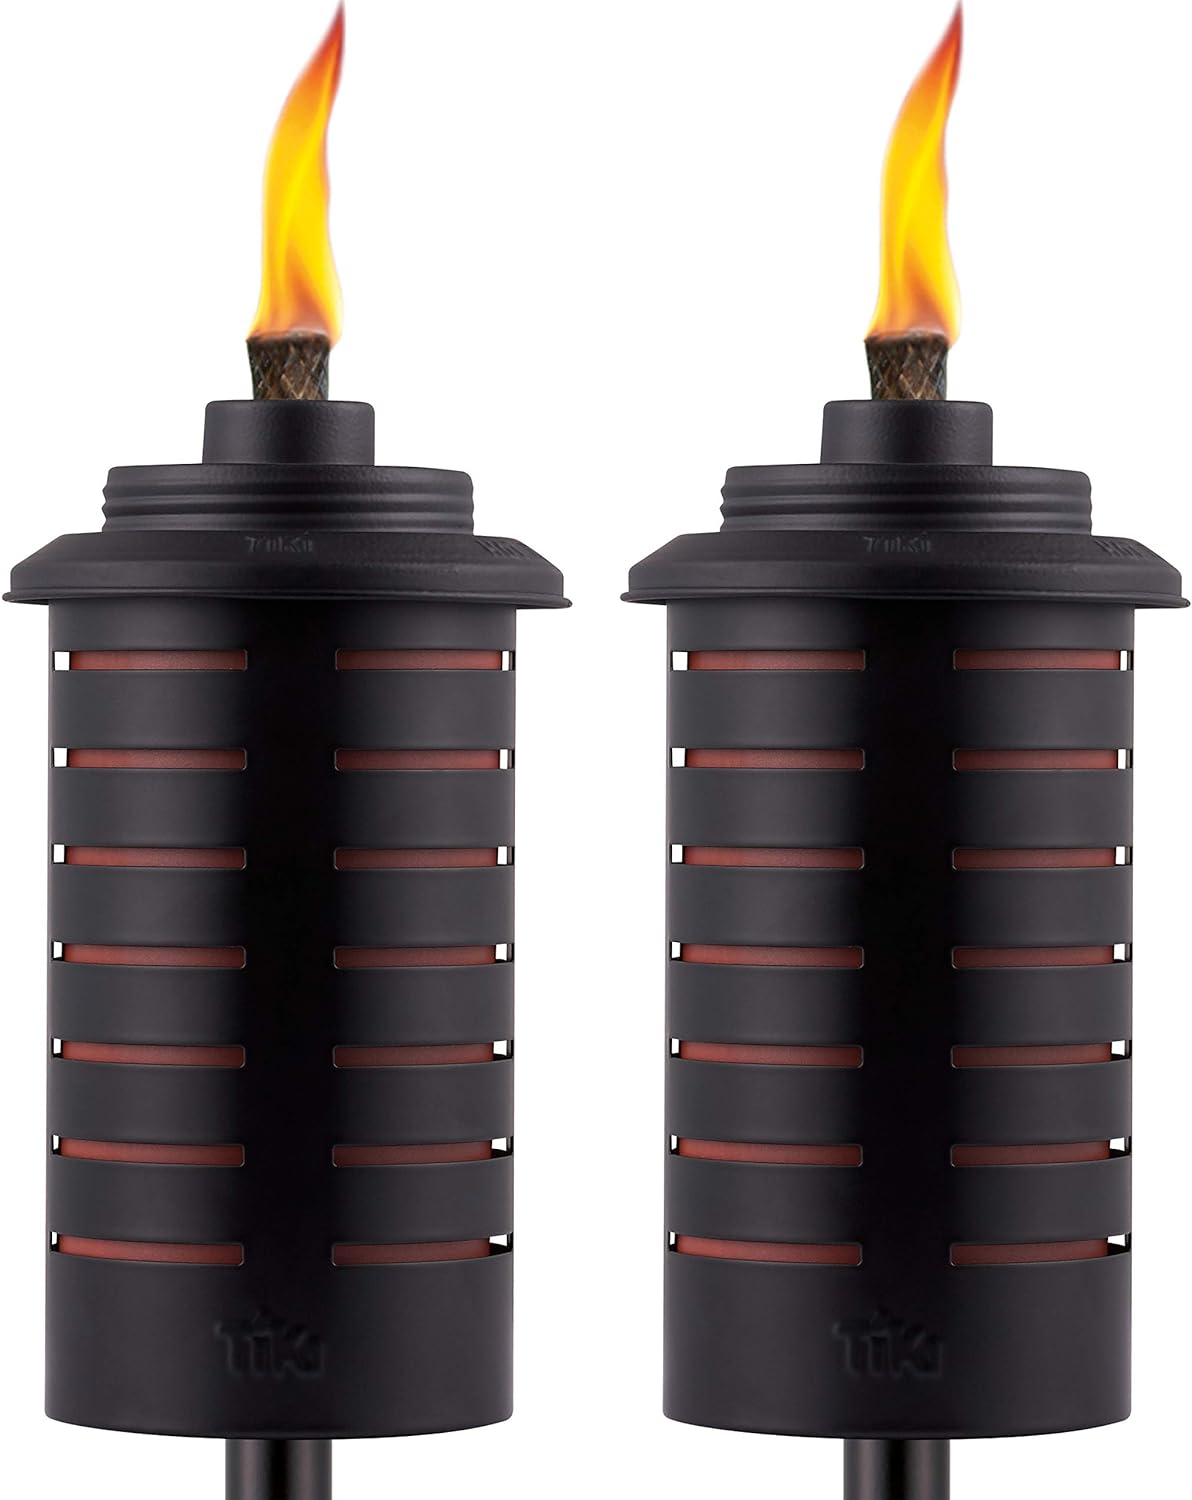 TIKI Brand Easy Install 65 Inch TIKI Torch, Outdoor Decorative Lighting for Lawn Patio Backyard, Metal Black and Orange, 2 - Pack, 1120130